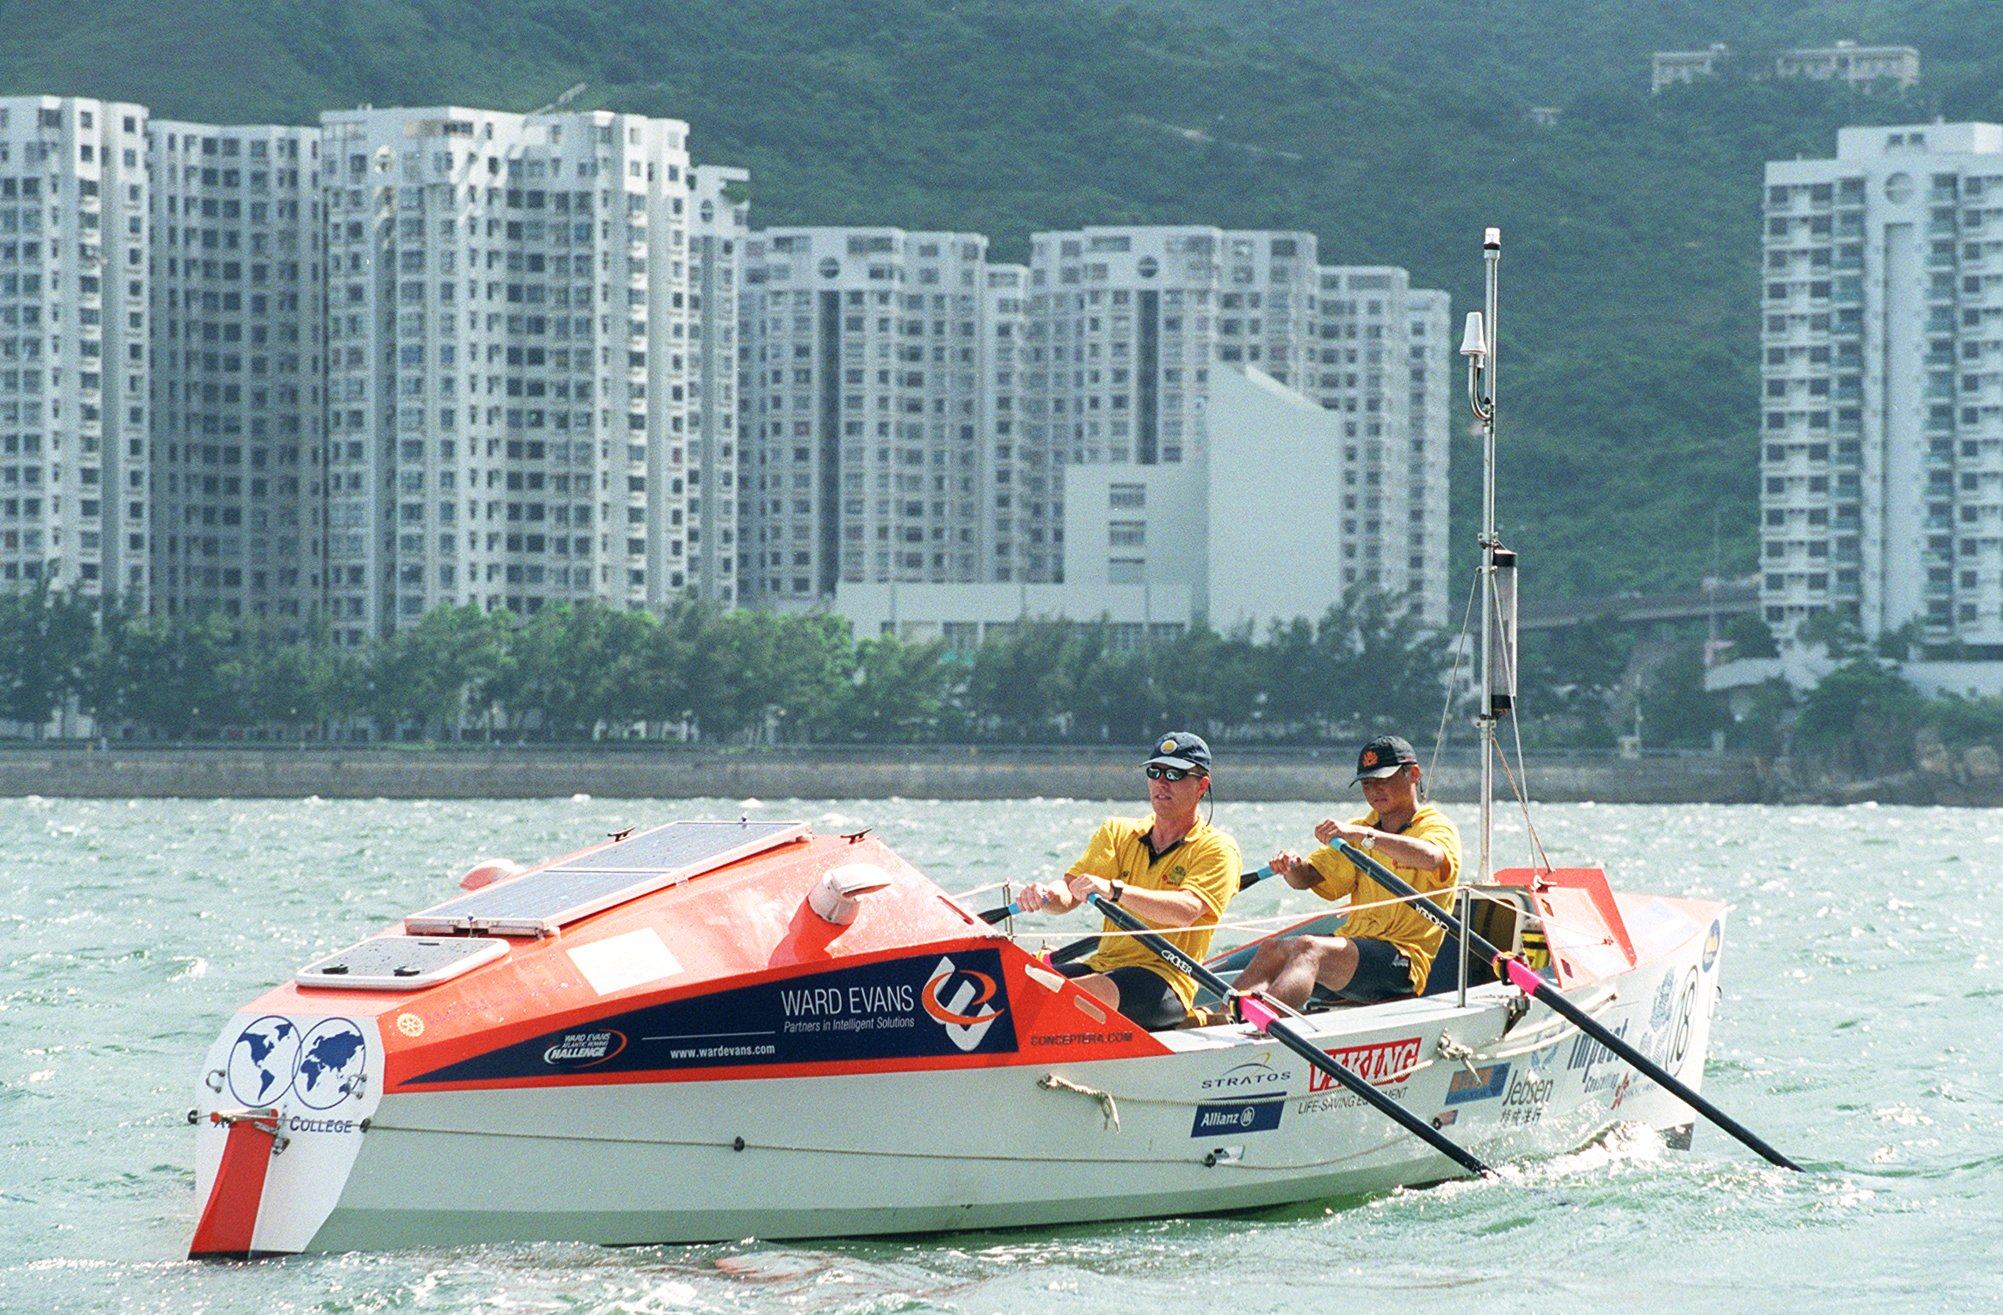 Christian Havrehed and Sun Haibin prepare for their 2001 Atlantic crossing, training in Hong Kong harbour. They now have a more ambitious goal. Photo: SCMP